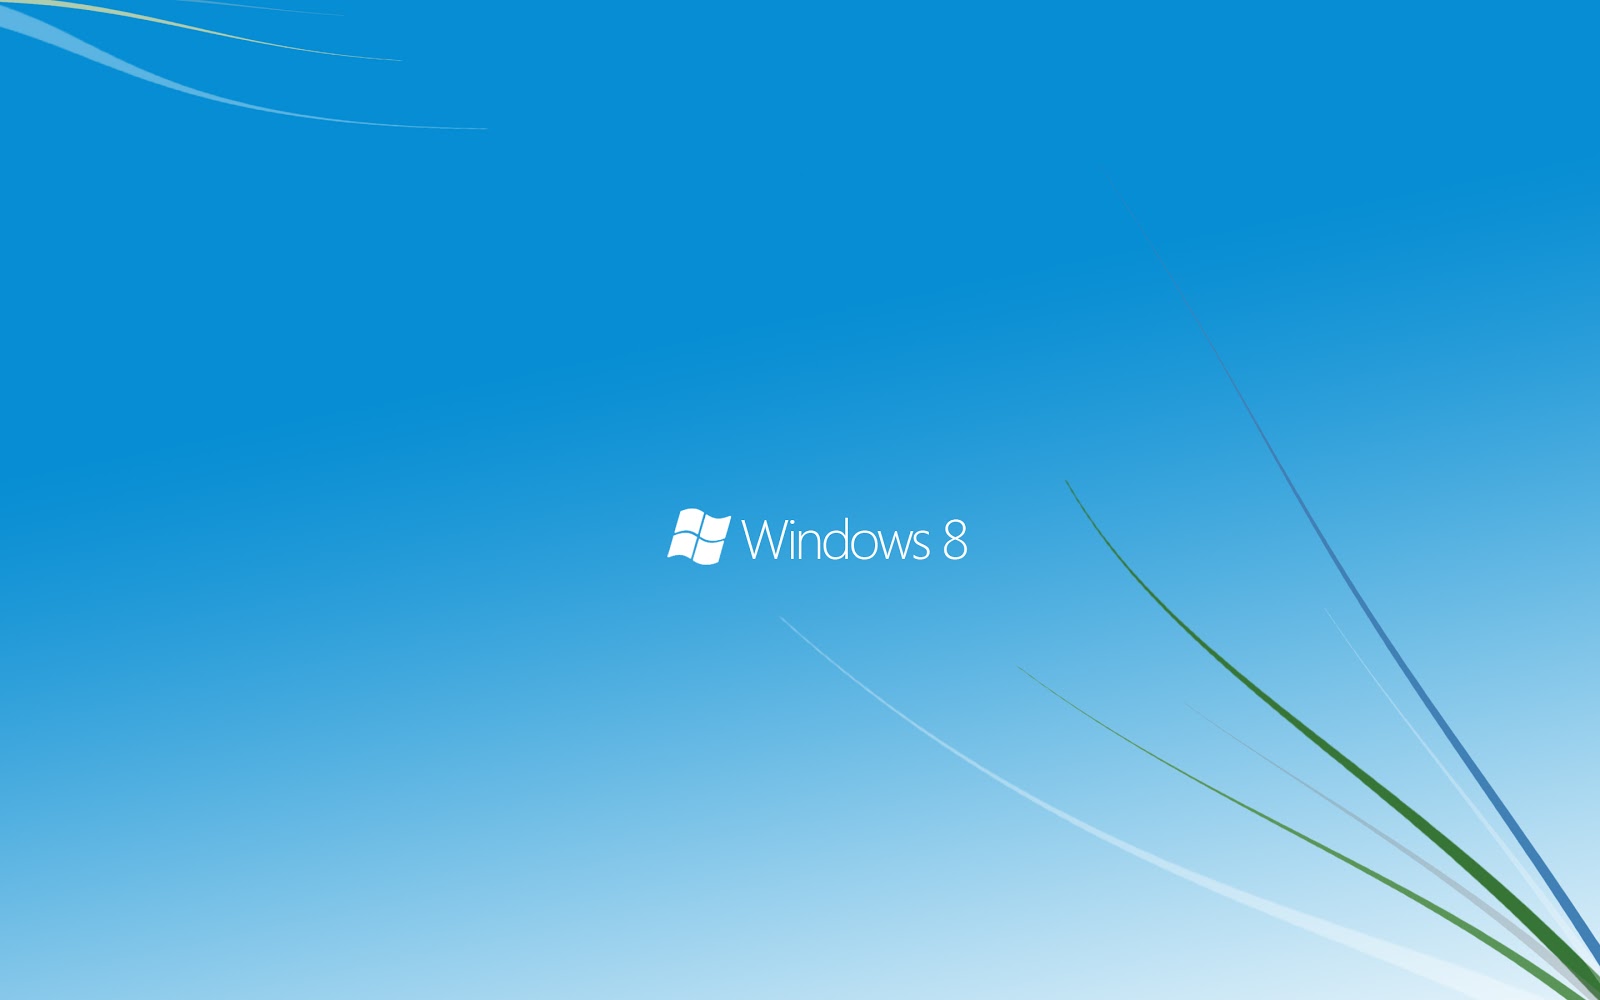  Wallpapers Collection 2013 Windows Server 2012 System Center 2012